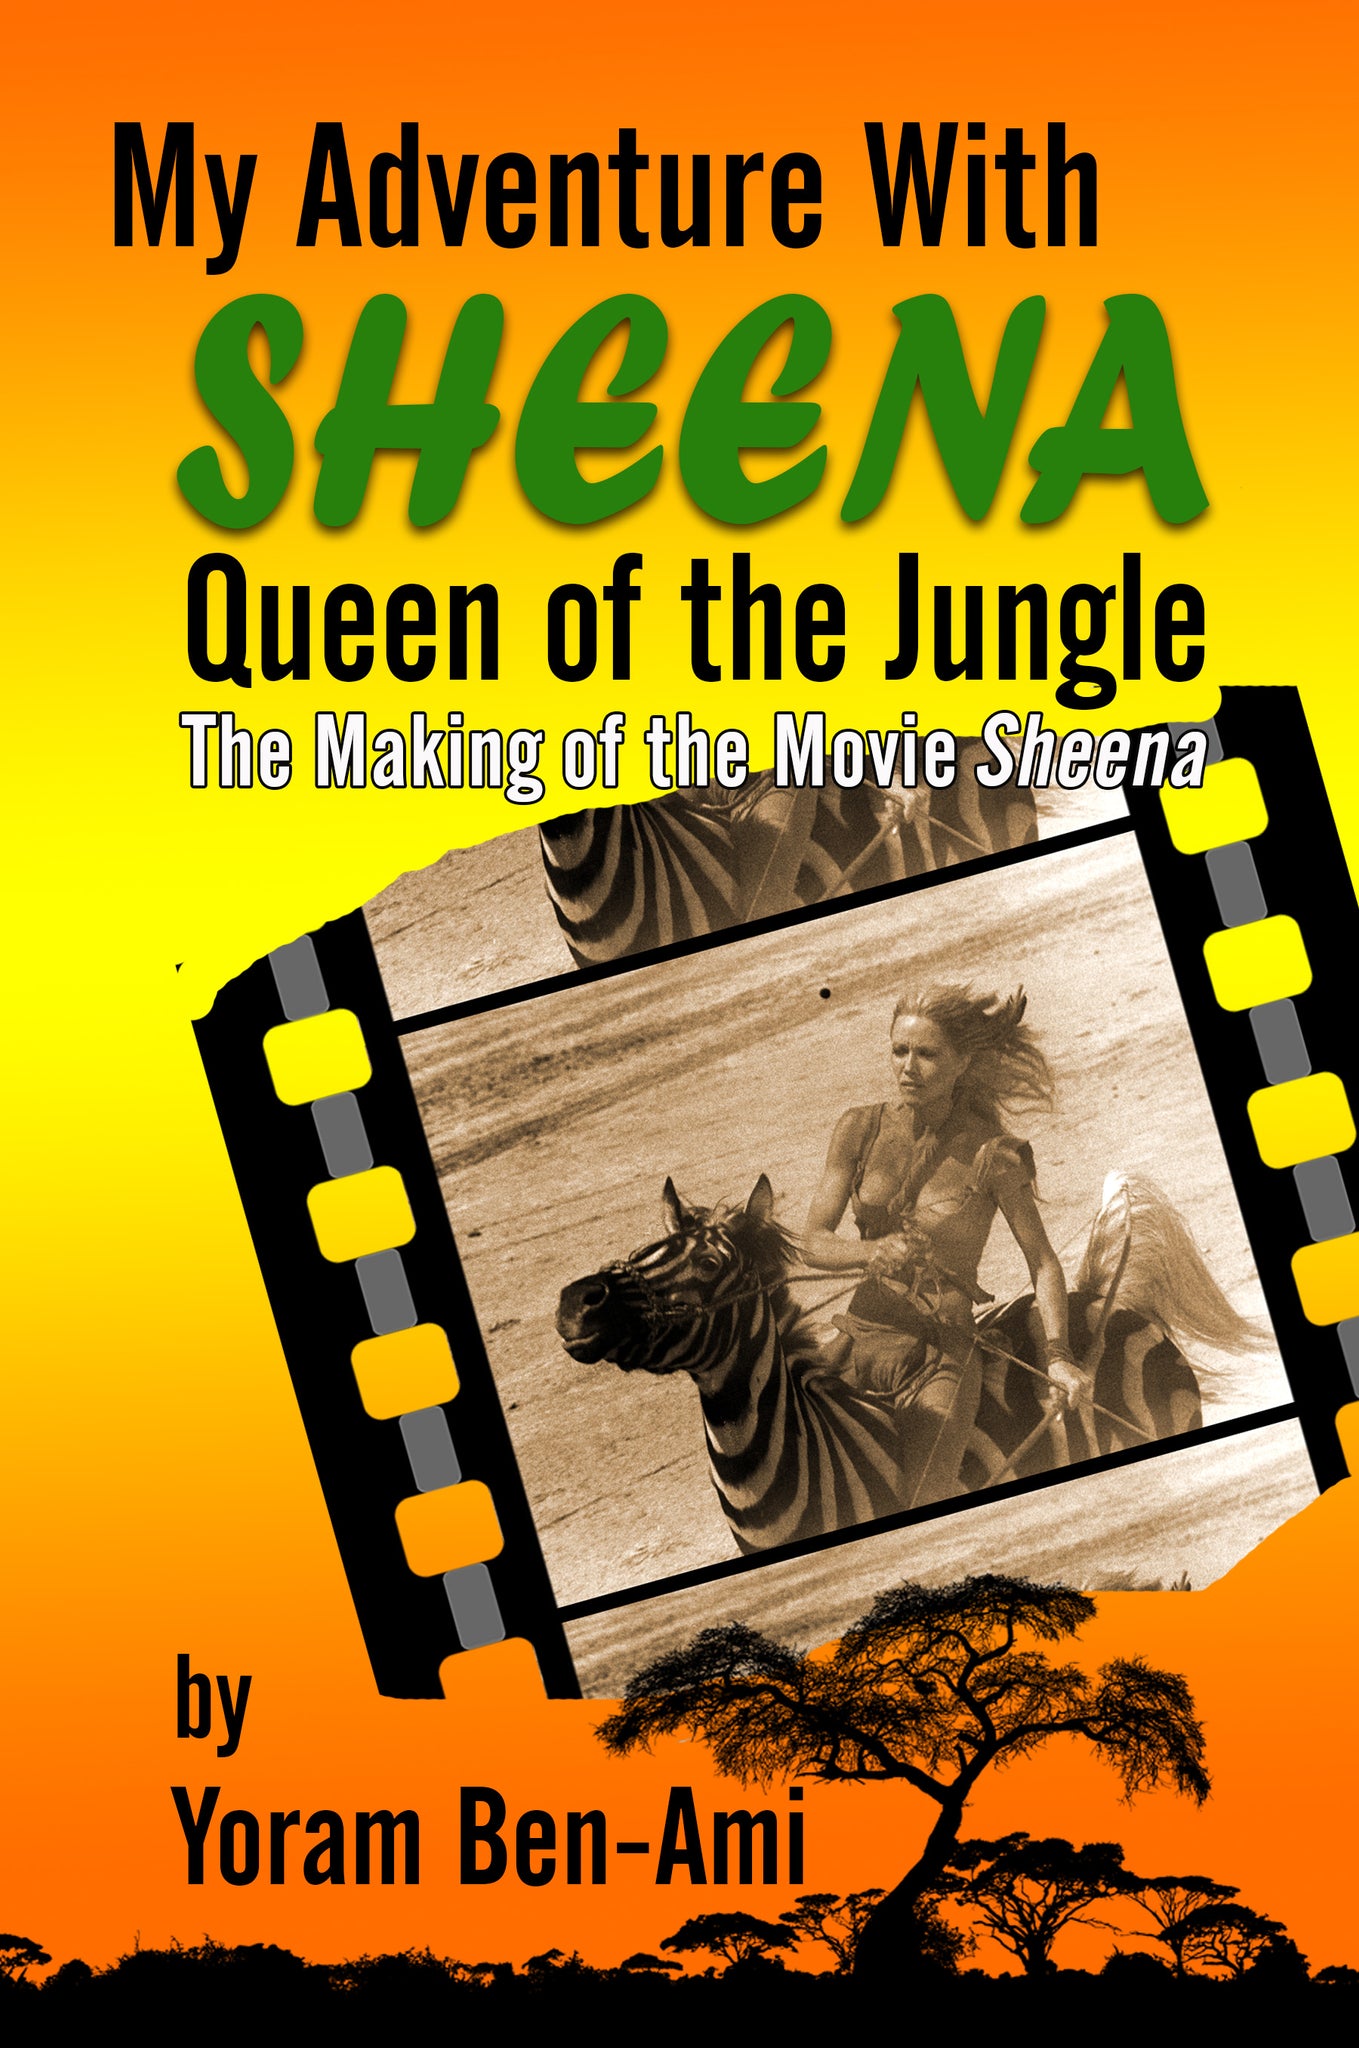 My Adventure With Sheena, Queen of the Jungle: The Making of the Movie Sheena (ebook)